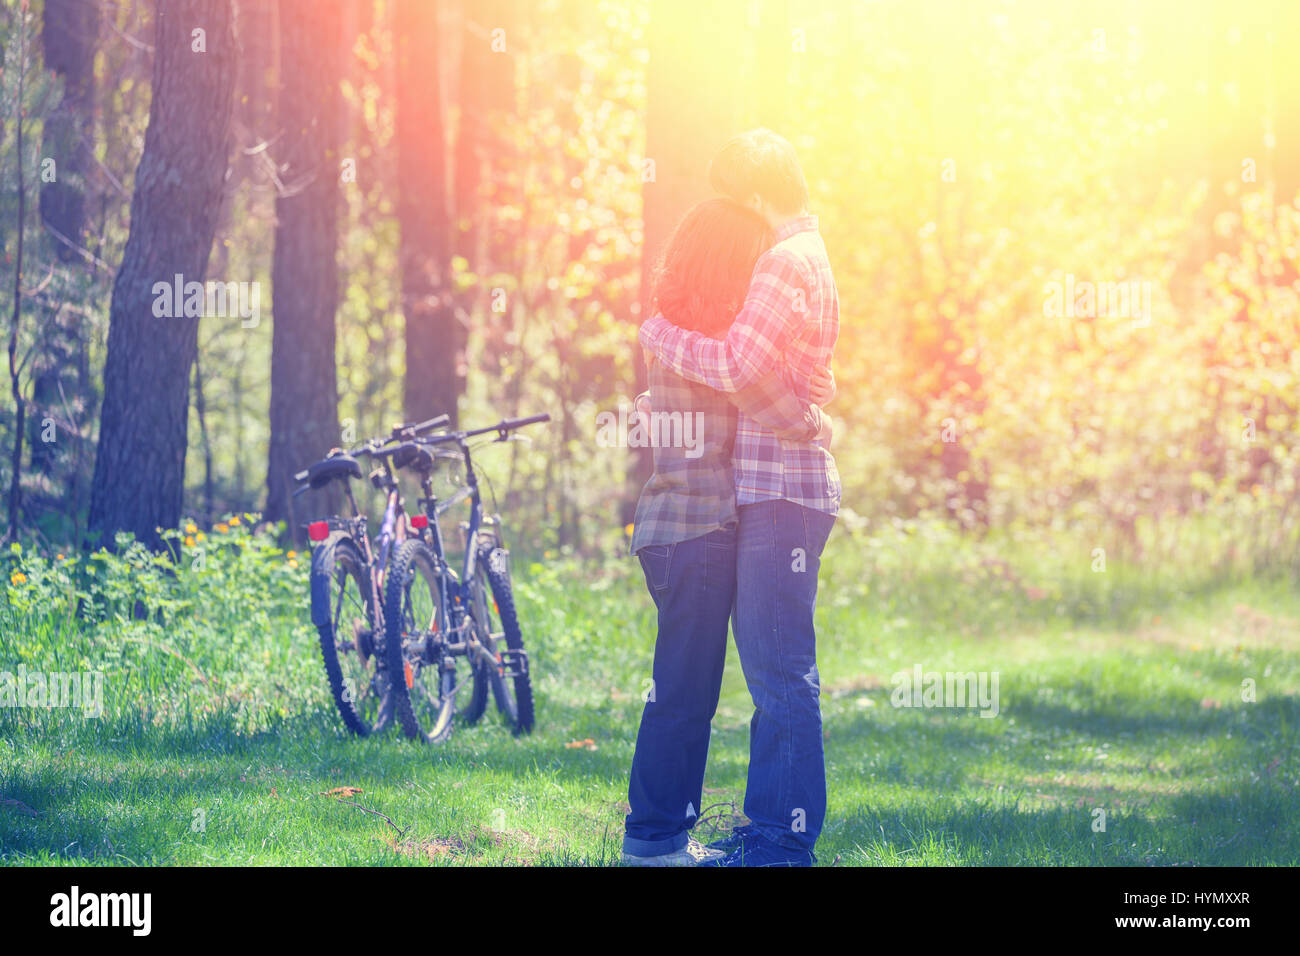 Young happy couple in love hugging in the forest near two bicycles. Summertime, sunny weather Stock Photo